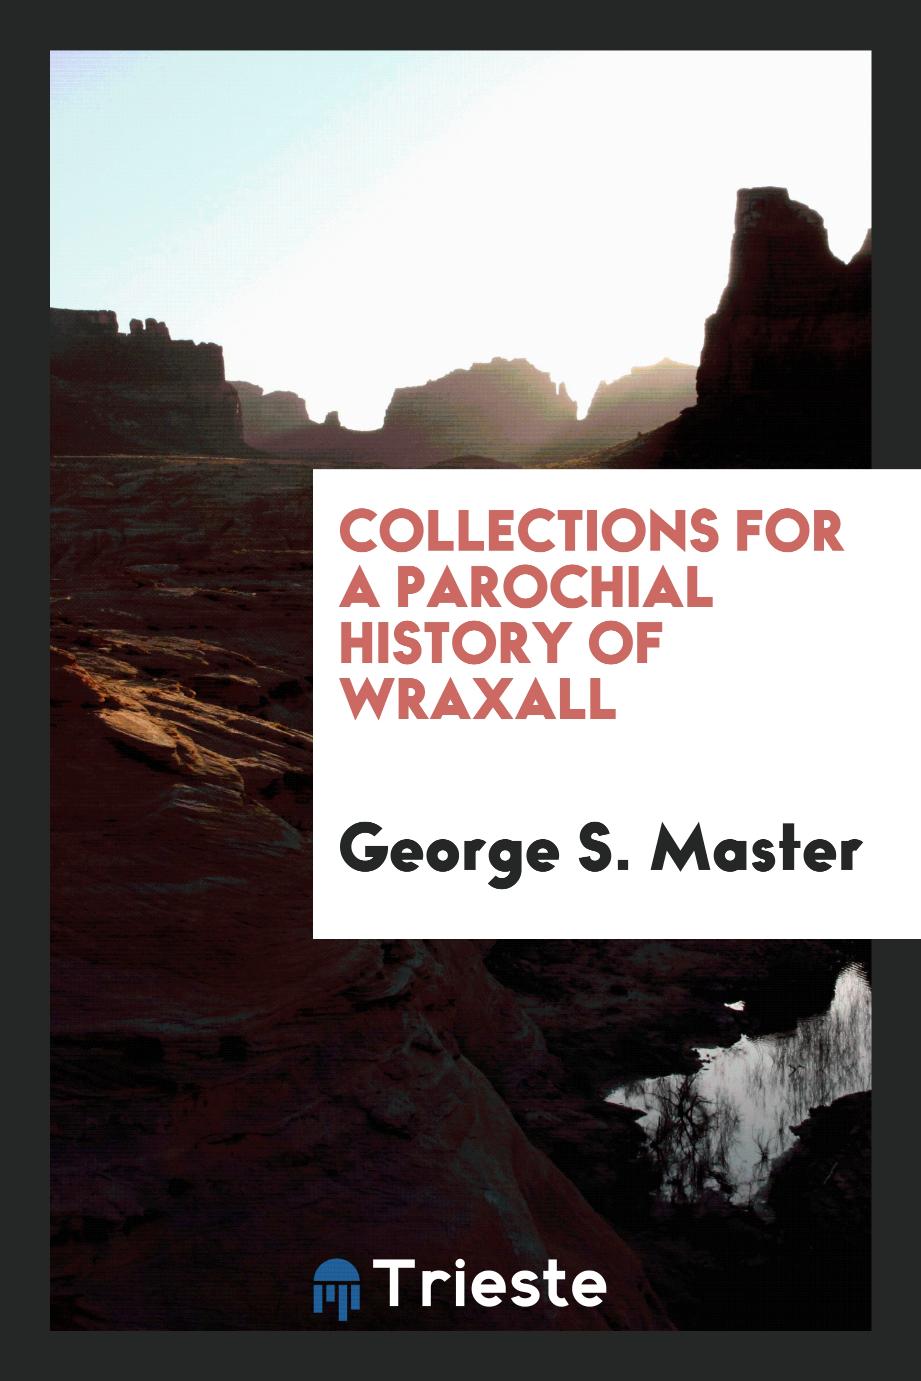 Collections for a Parochial History of Wraxall